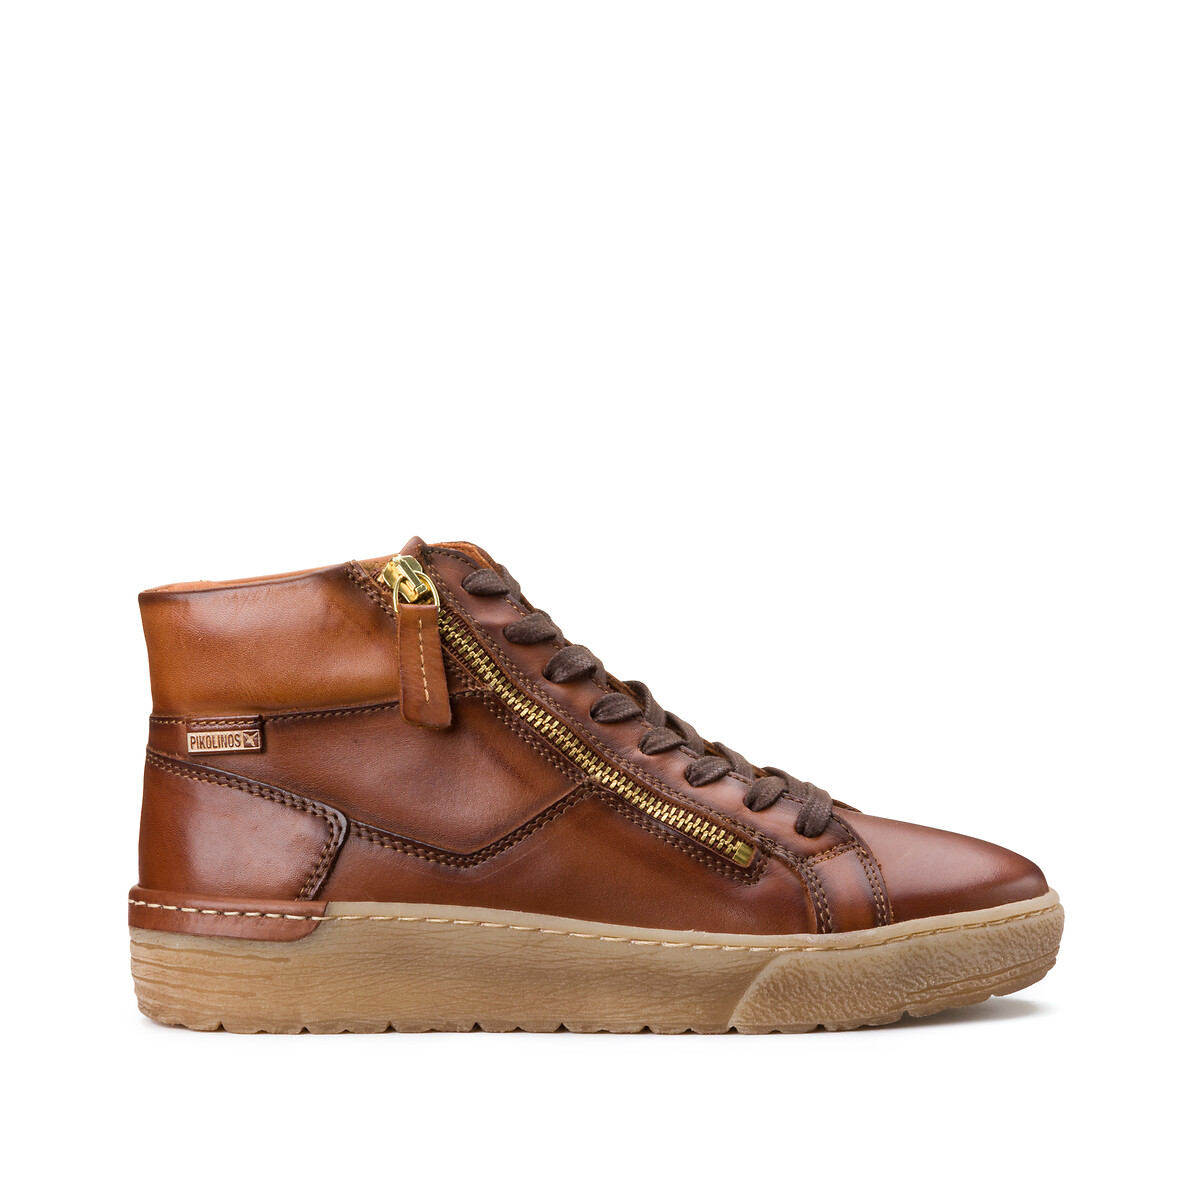 Vitoria Leather High Top Trainers